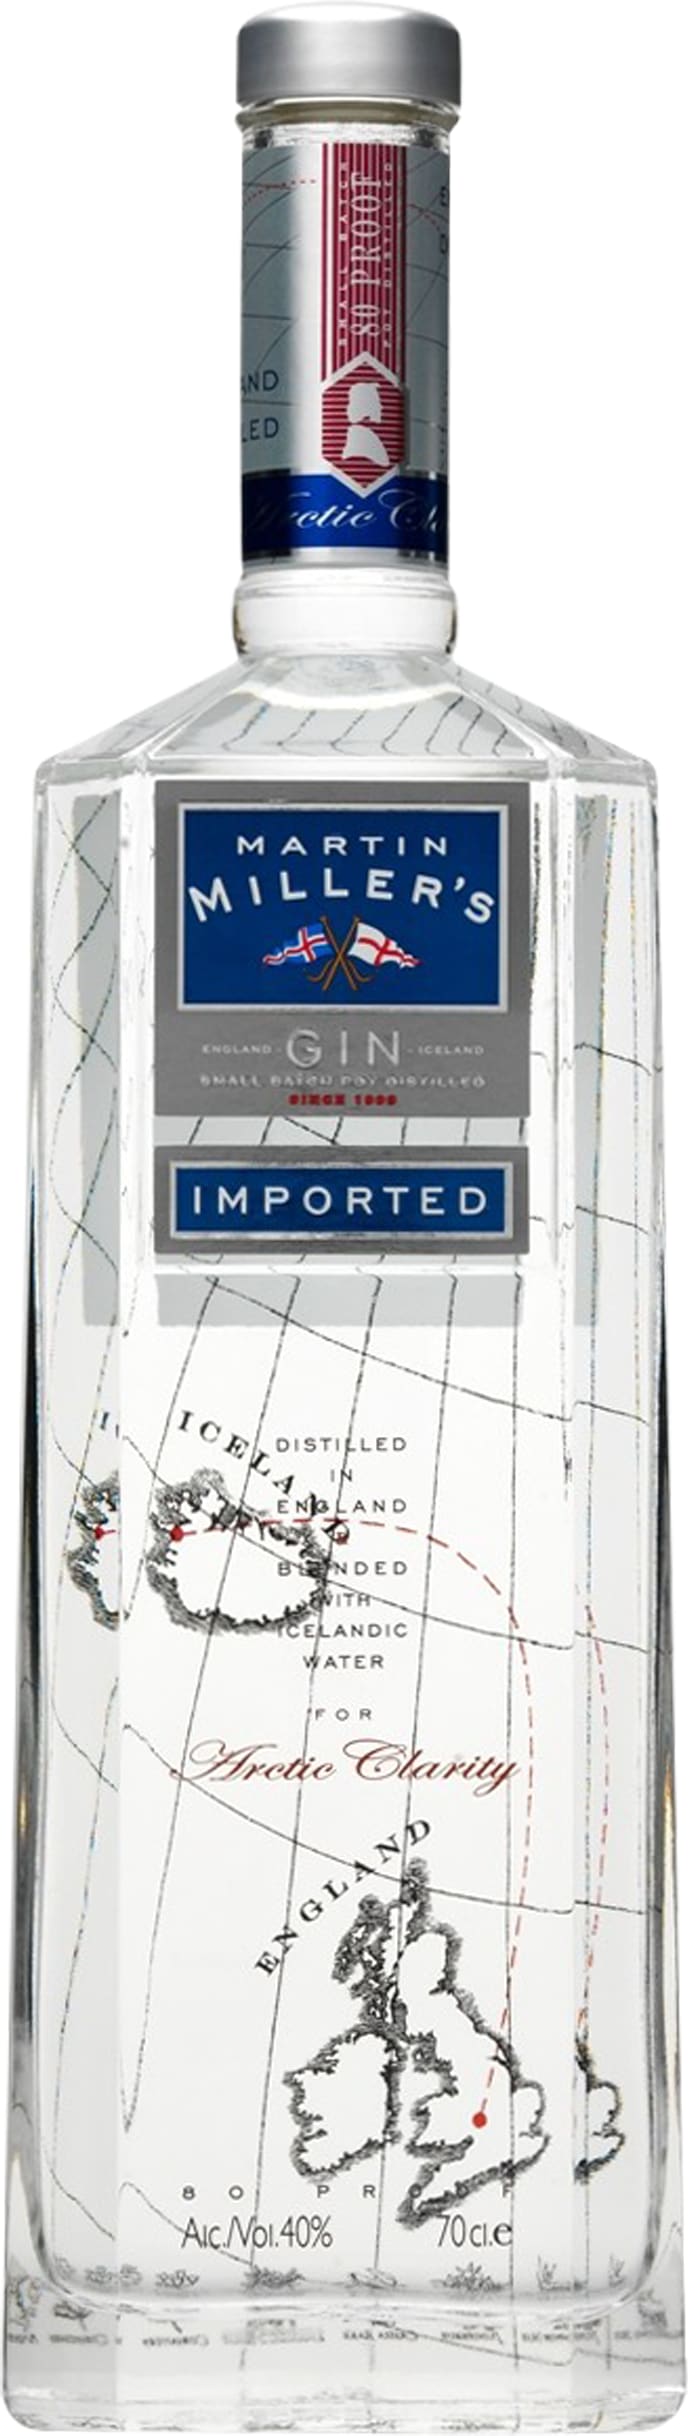 Martin Miller's Gin 70cl NV - Buy Martin Miller's Wines from GREAT WINES DIRECT wine shop